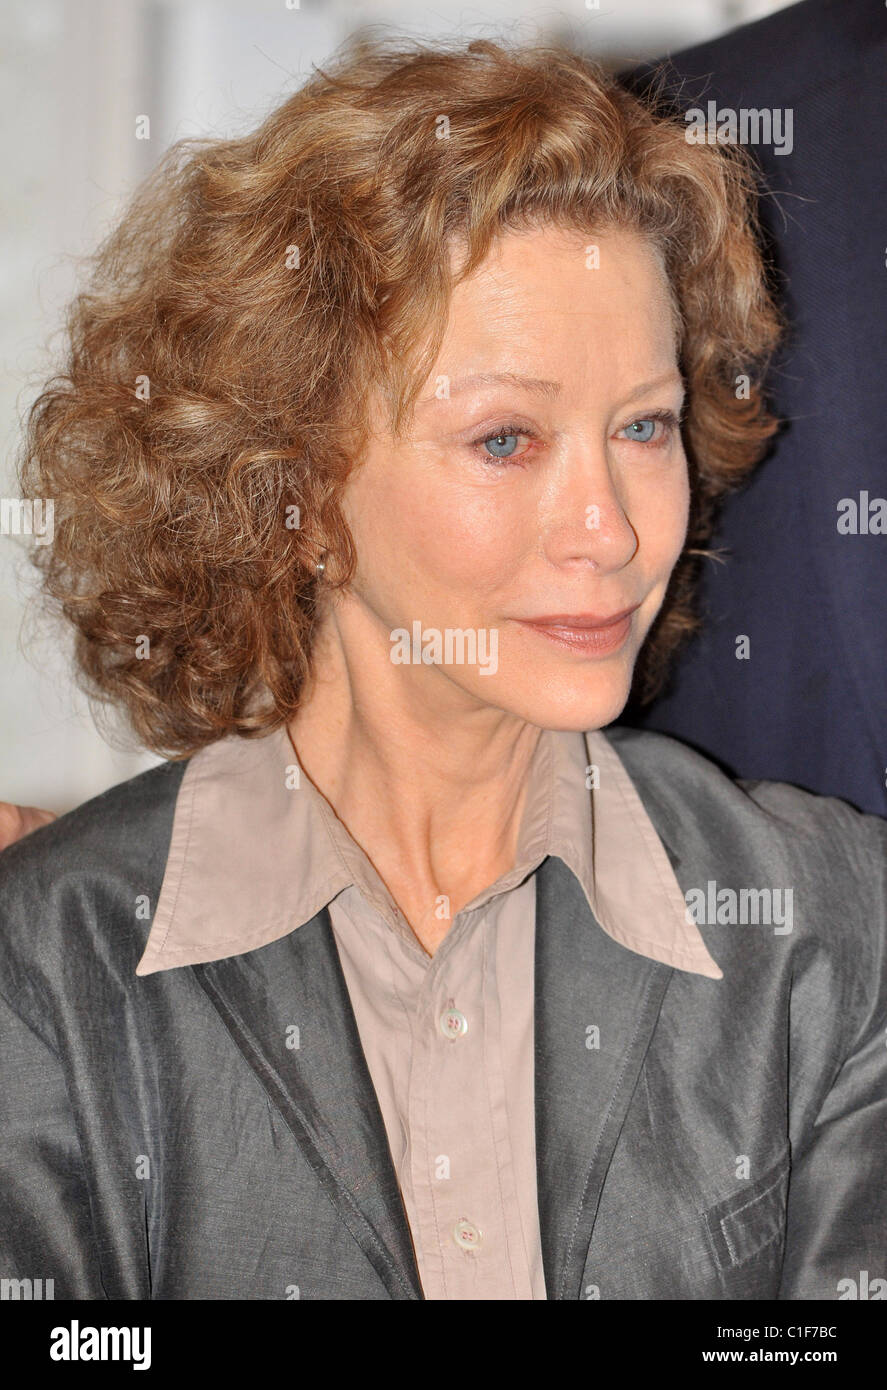 Images connie booth 43+ Populer